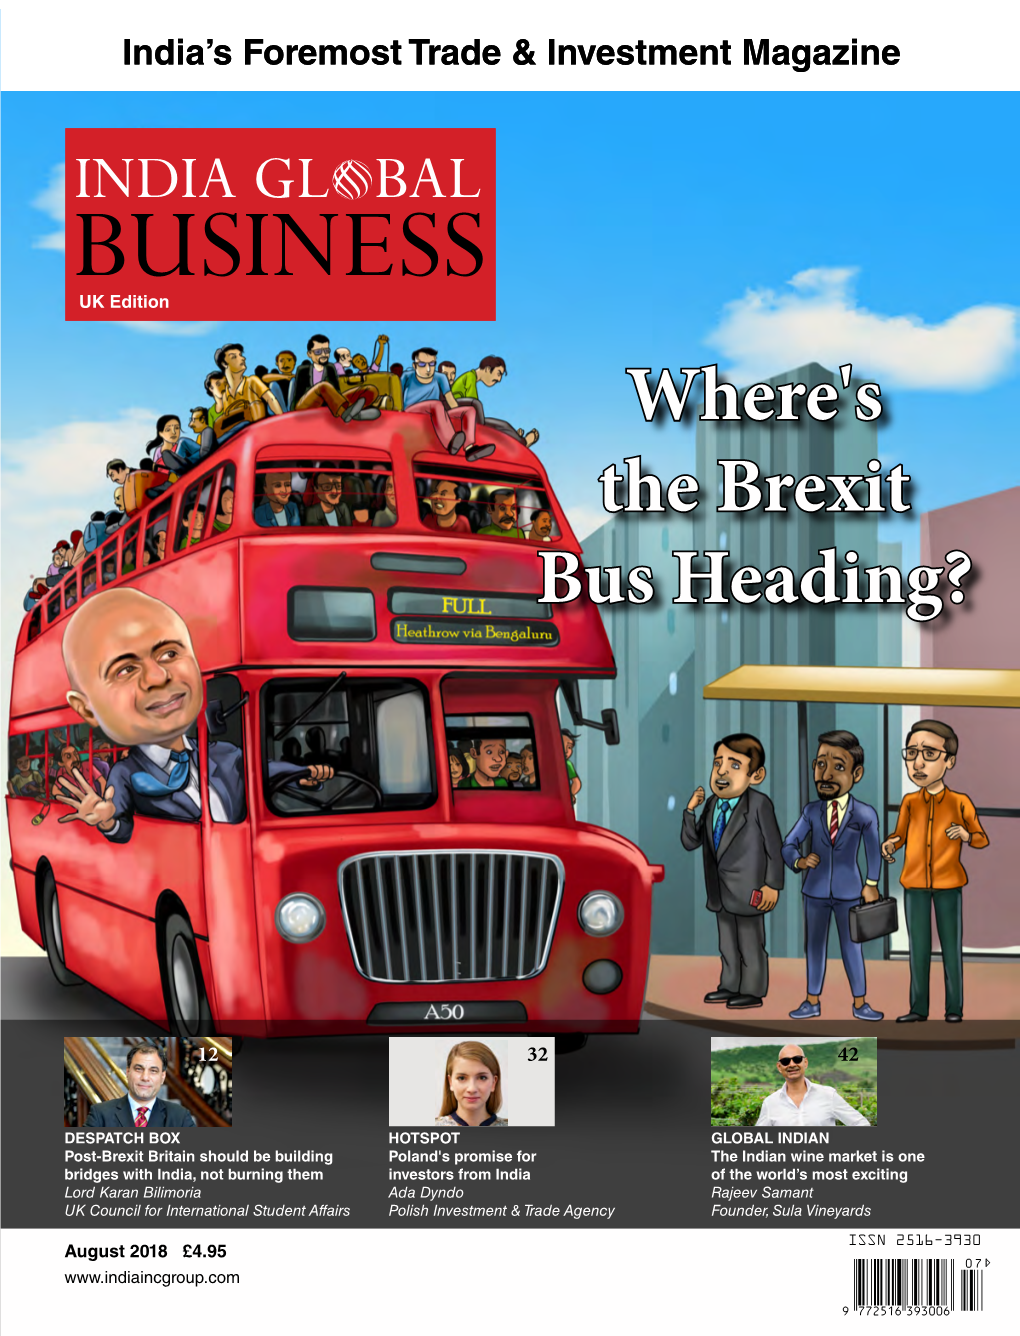 BUSINESS UK Edition Where's the Brexit Bus Heading?